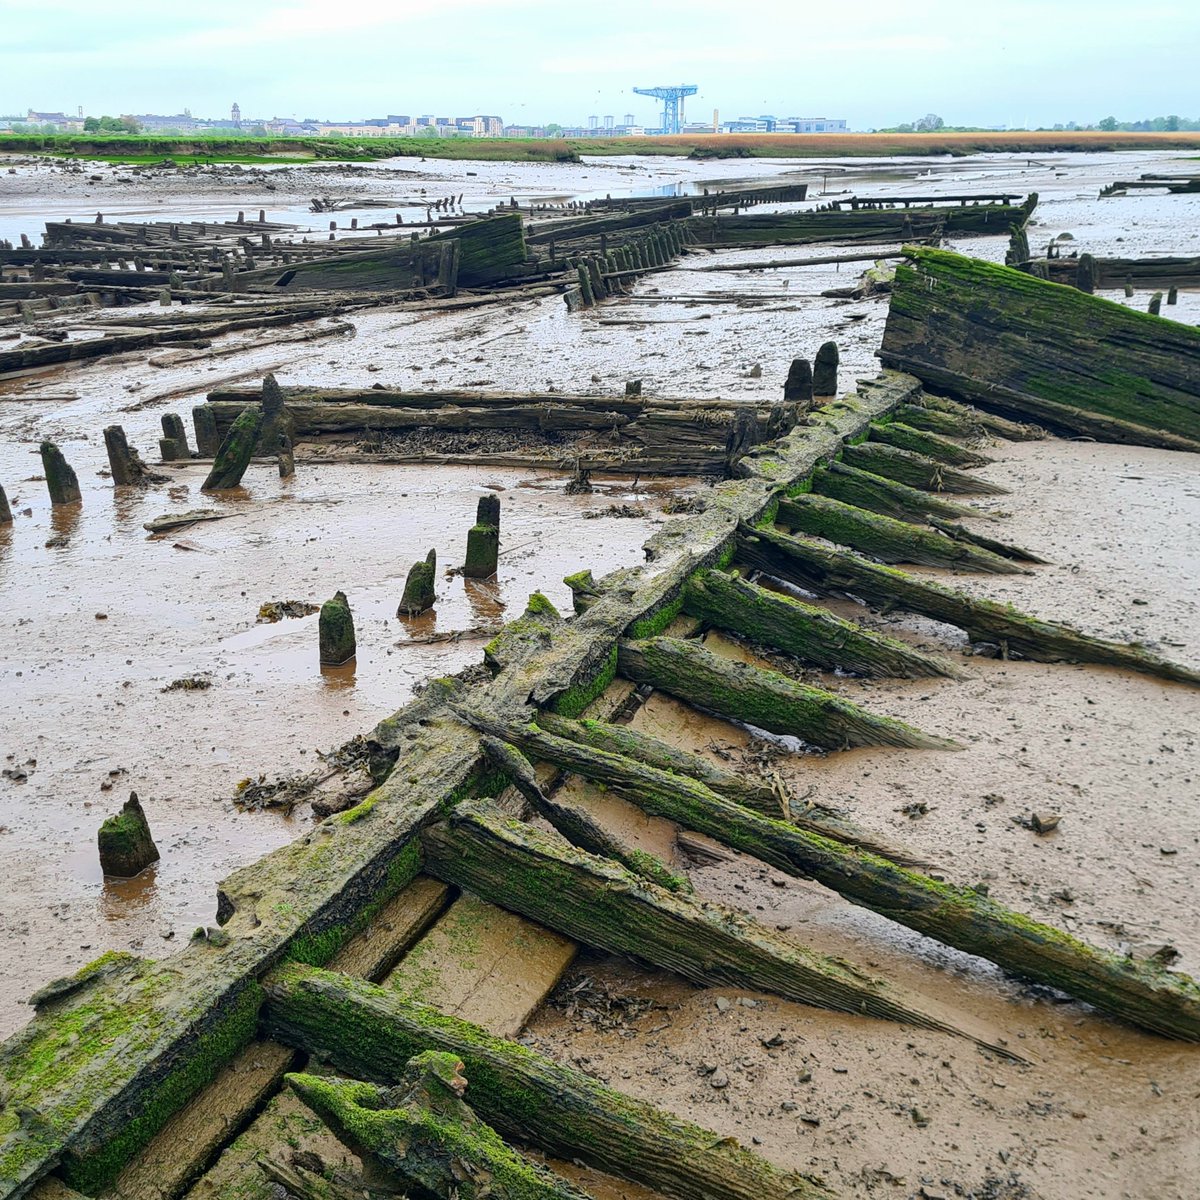 The remains of wooden mud punts on the banks of the Clyde at the Newshot Island Boat Graveyard. 

Cont./

#glasgow #theclyde #glasgowhistory #oldboats #newshotisland #erskine